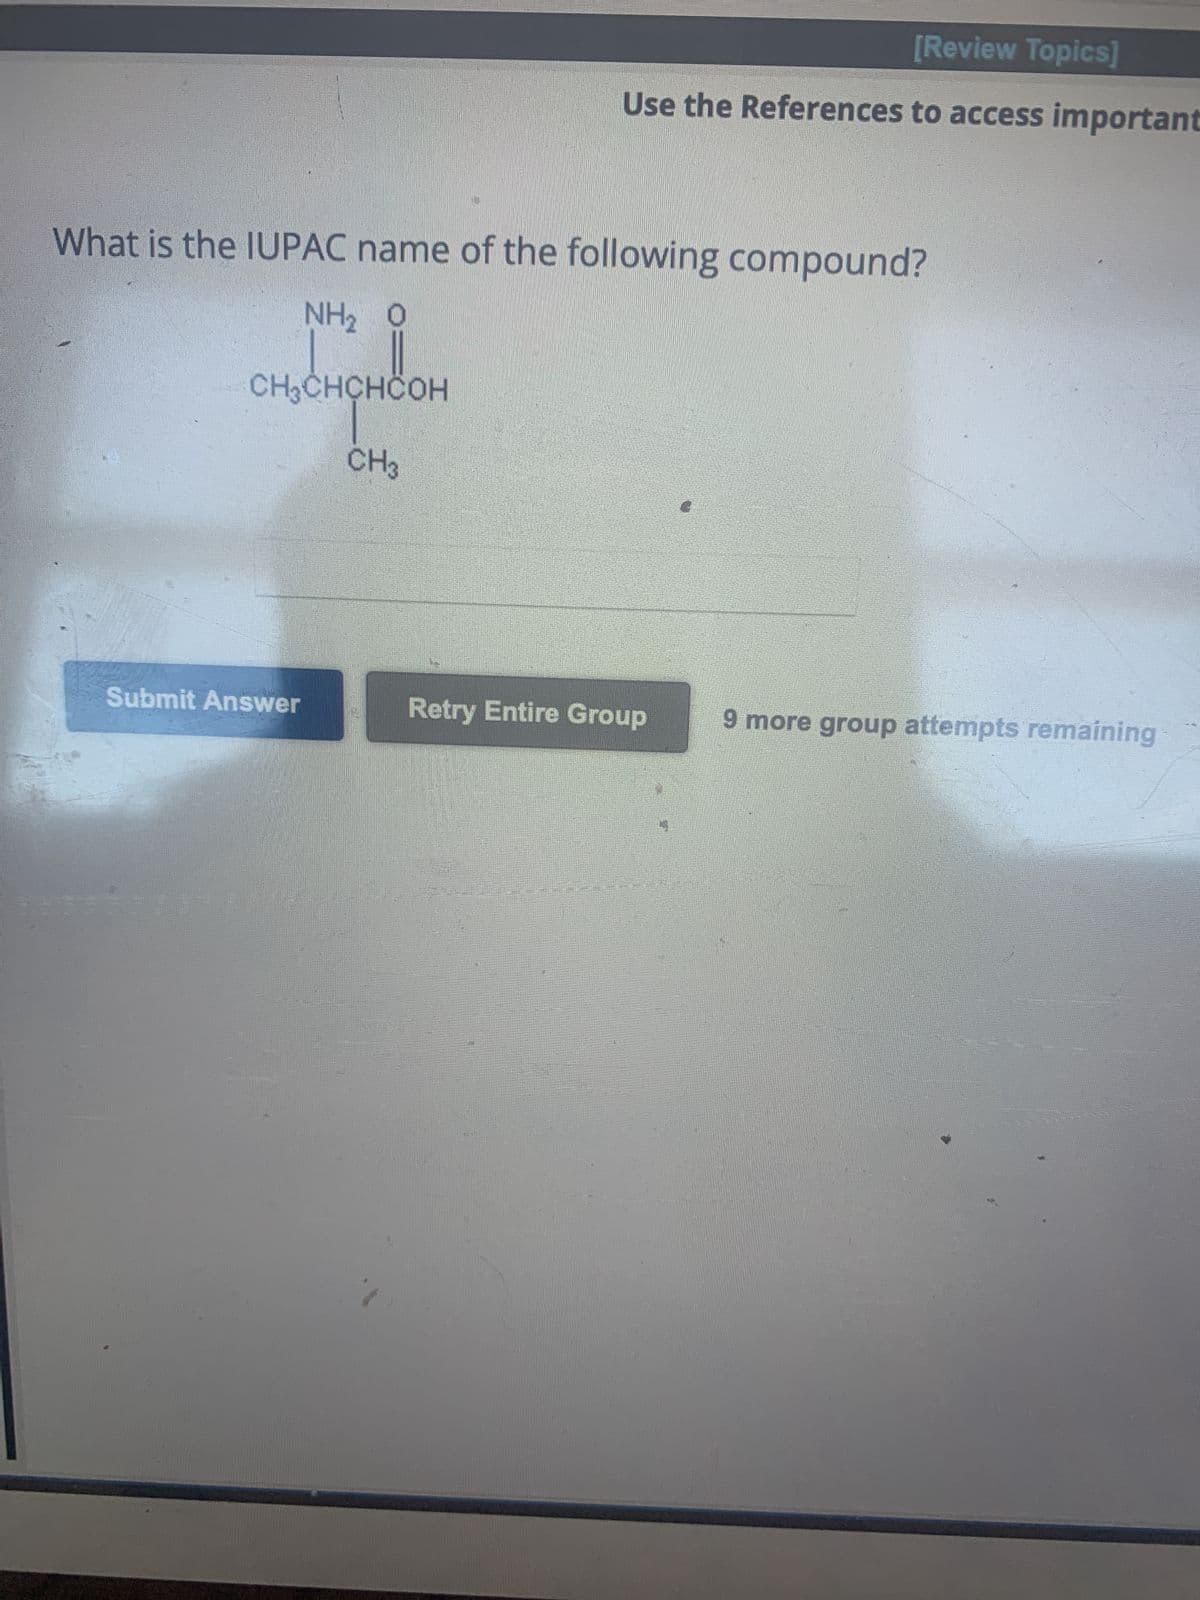 What is the IUPAC name of the following compound?
NH, ọ
CH₂CHCHCOH
CH3
Submit Answer
[Review Topics]
Use the References to access important
125552120
Retry Entire Group
9 more group attempts remaining